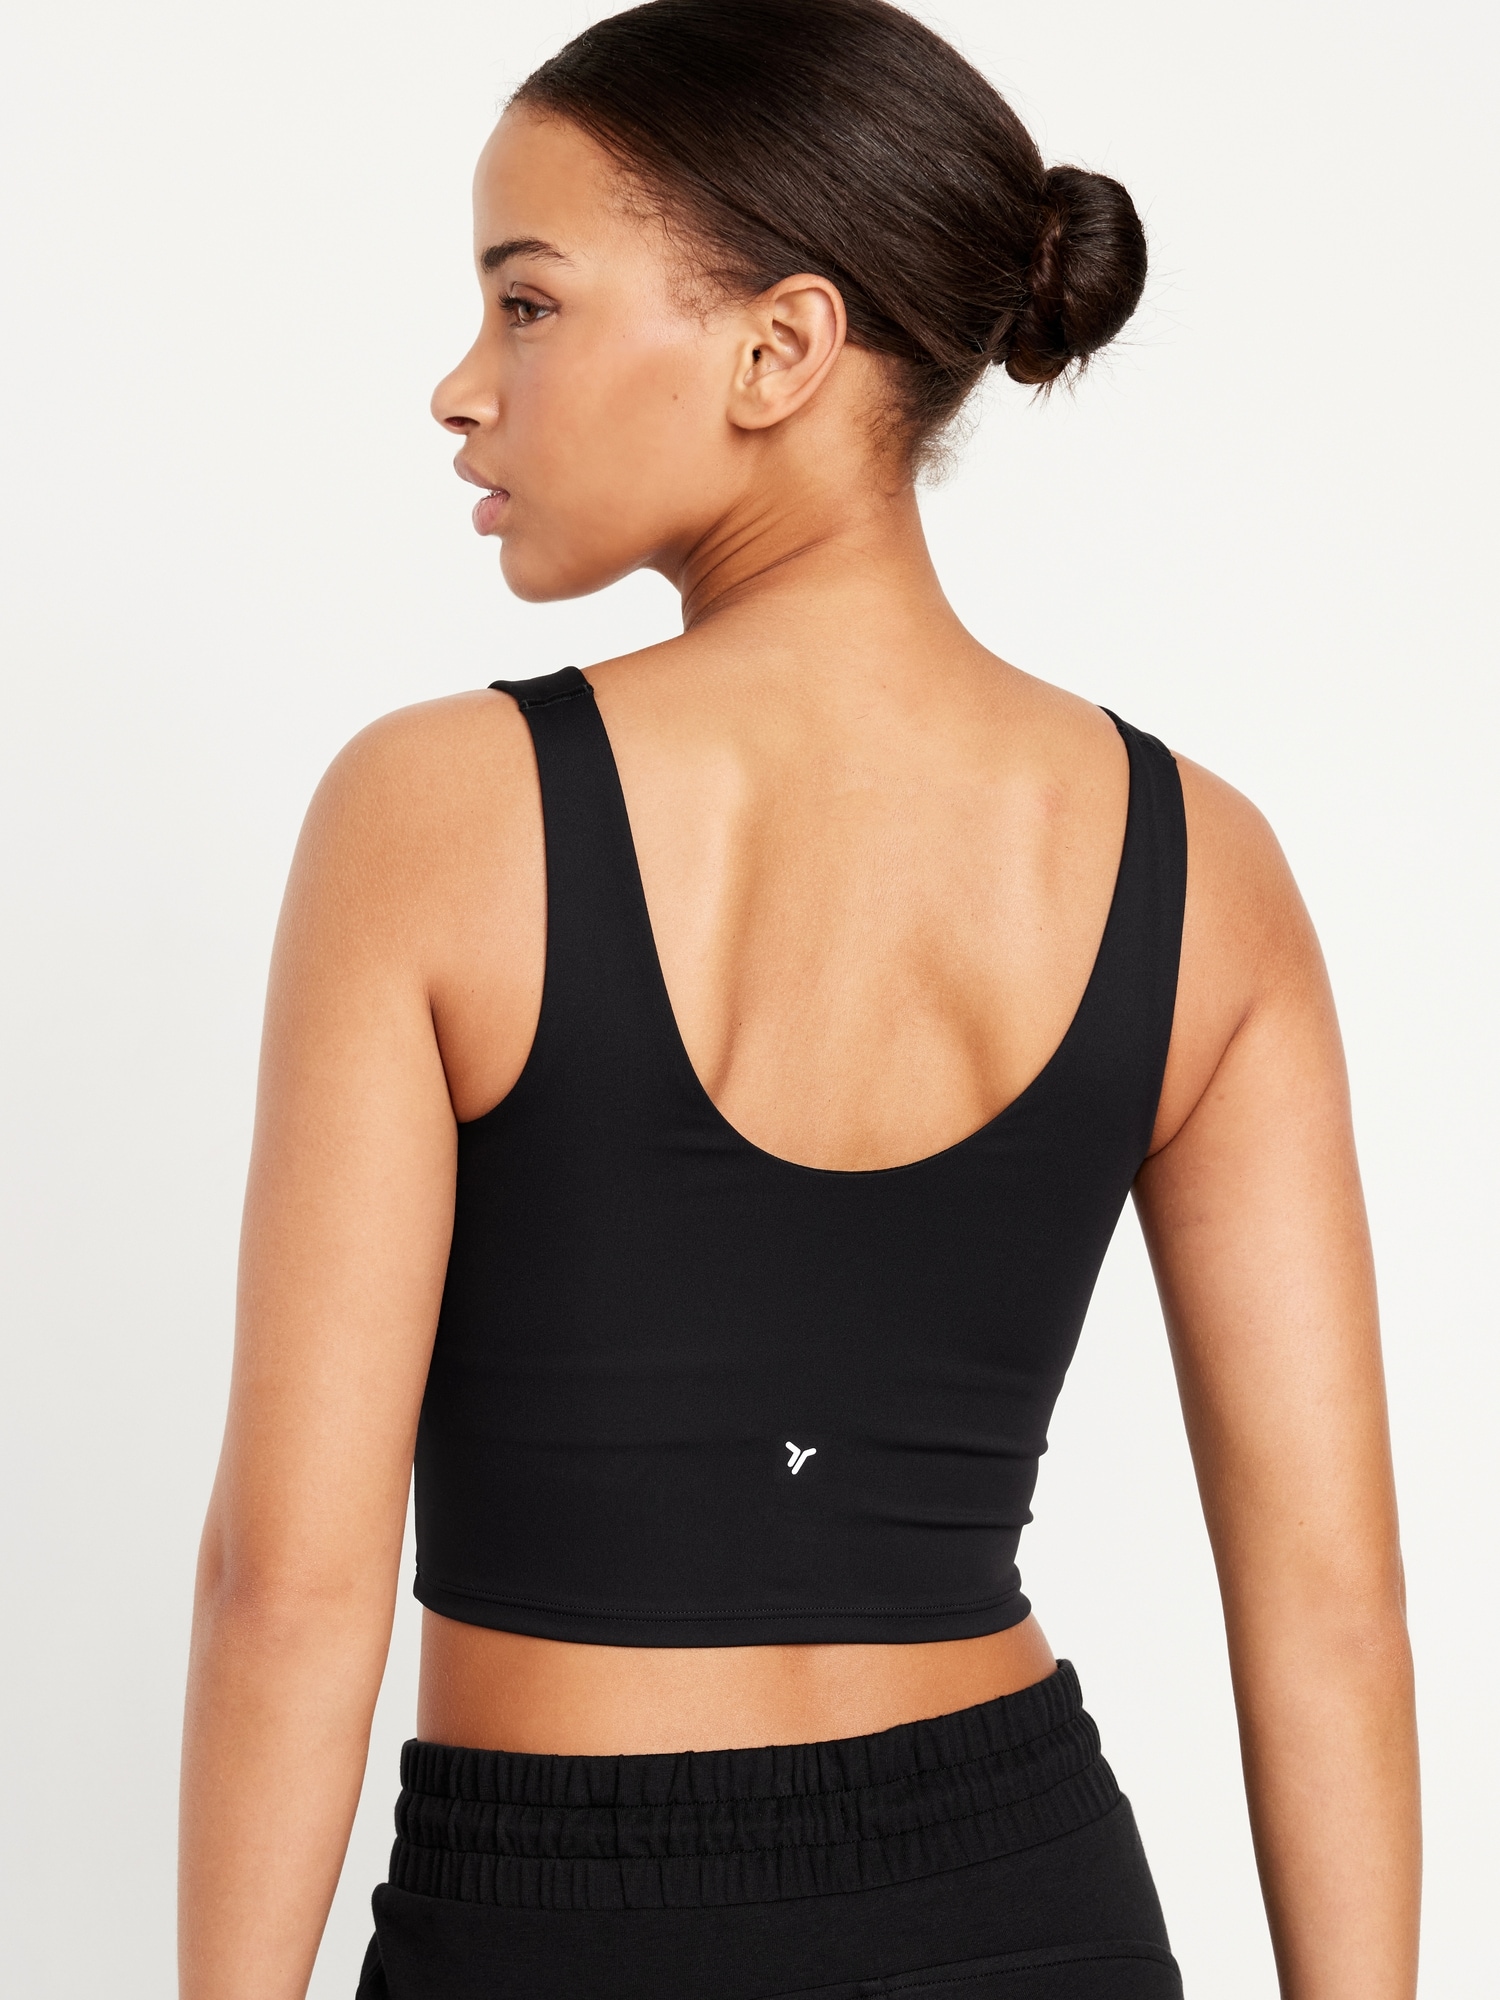 Old Navy PowerSoft Molded Cup Longline Sports Bra